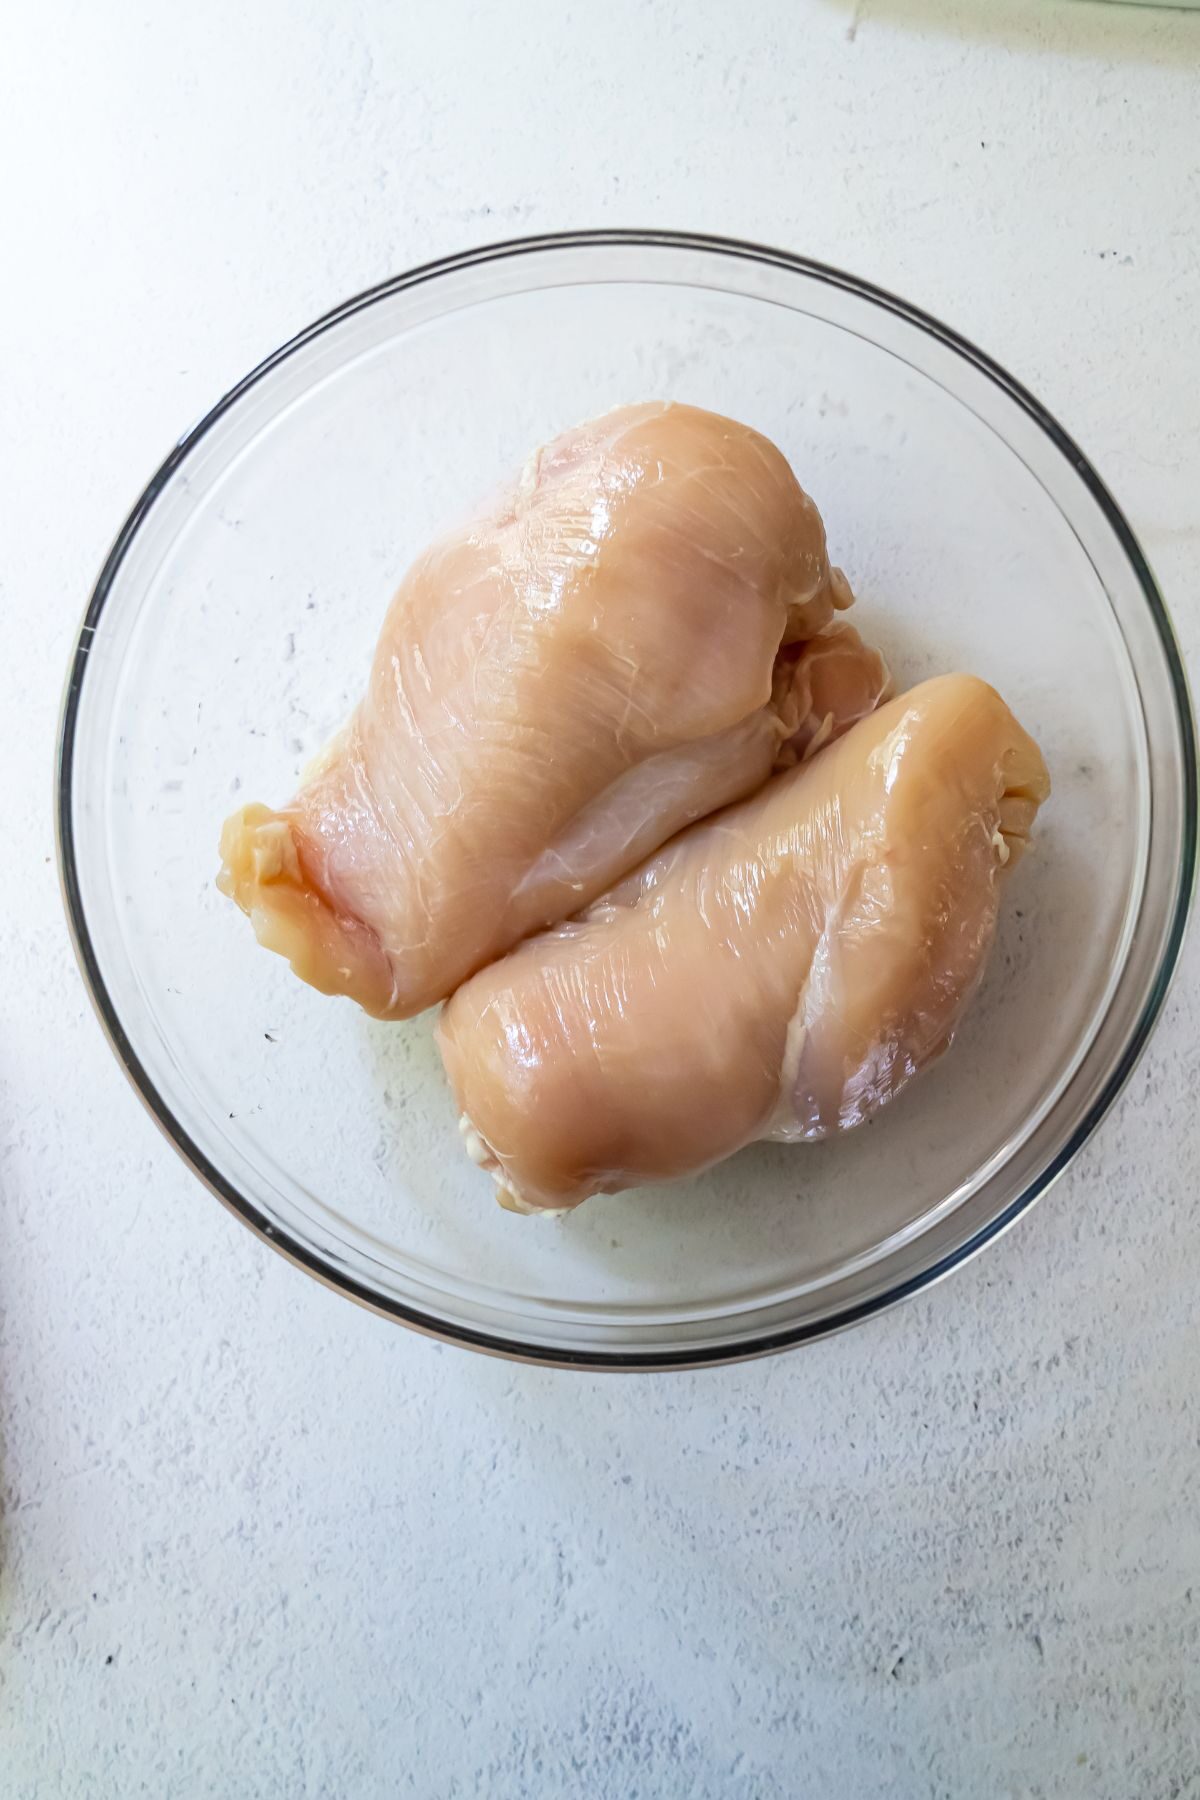 Two raw chicken breasts in a glass bowl.